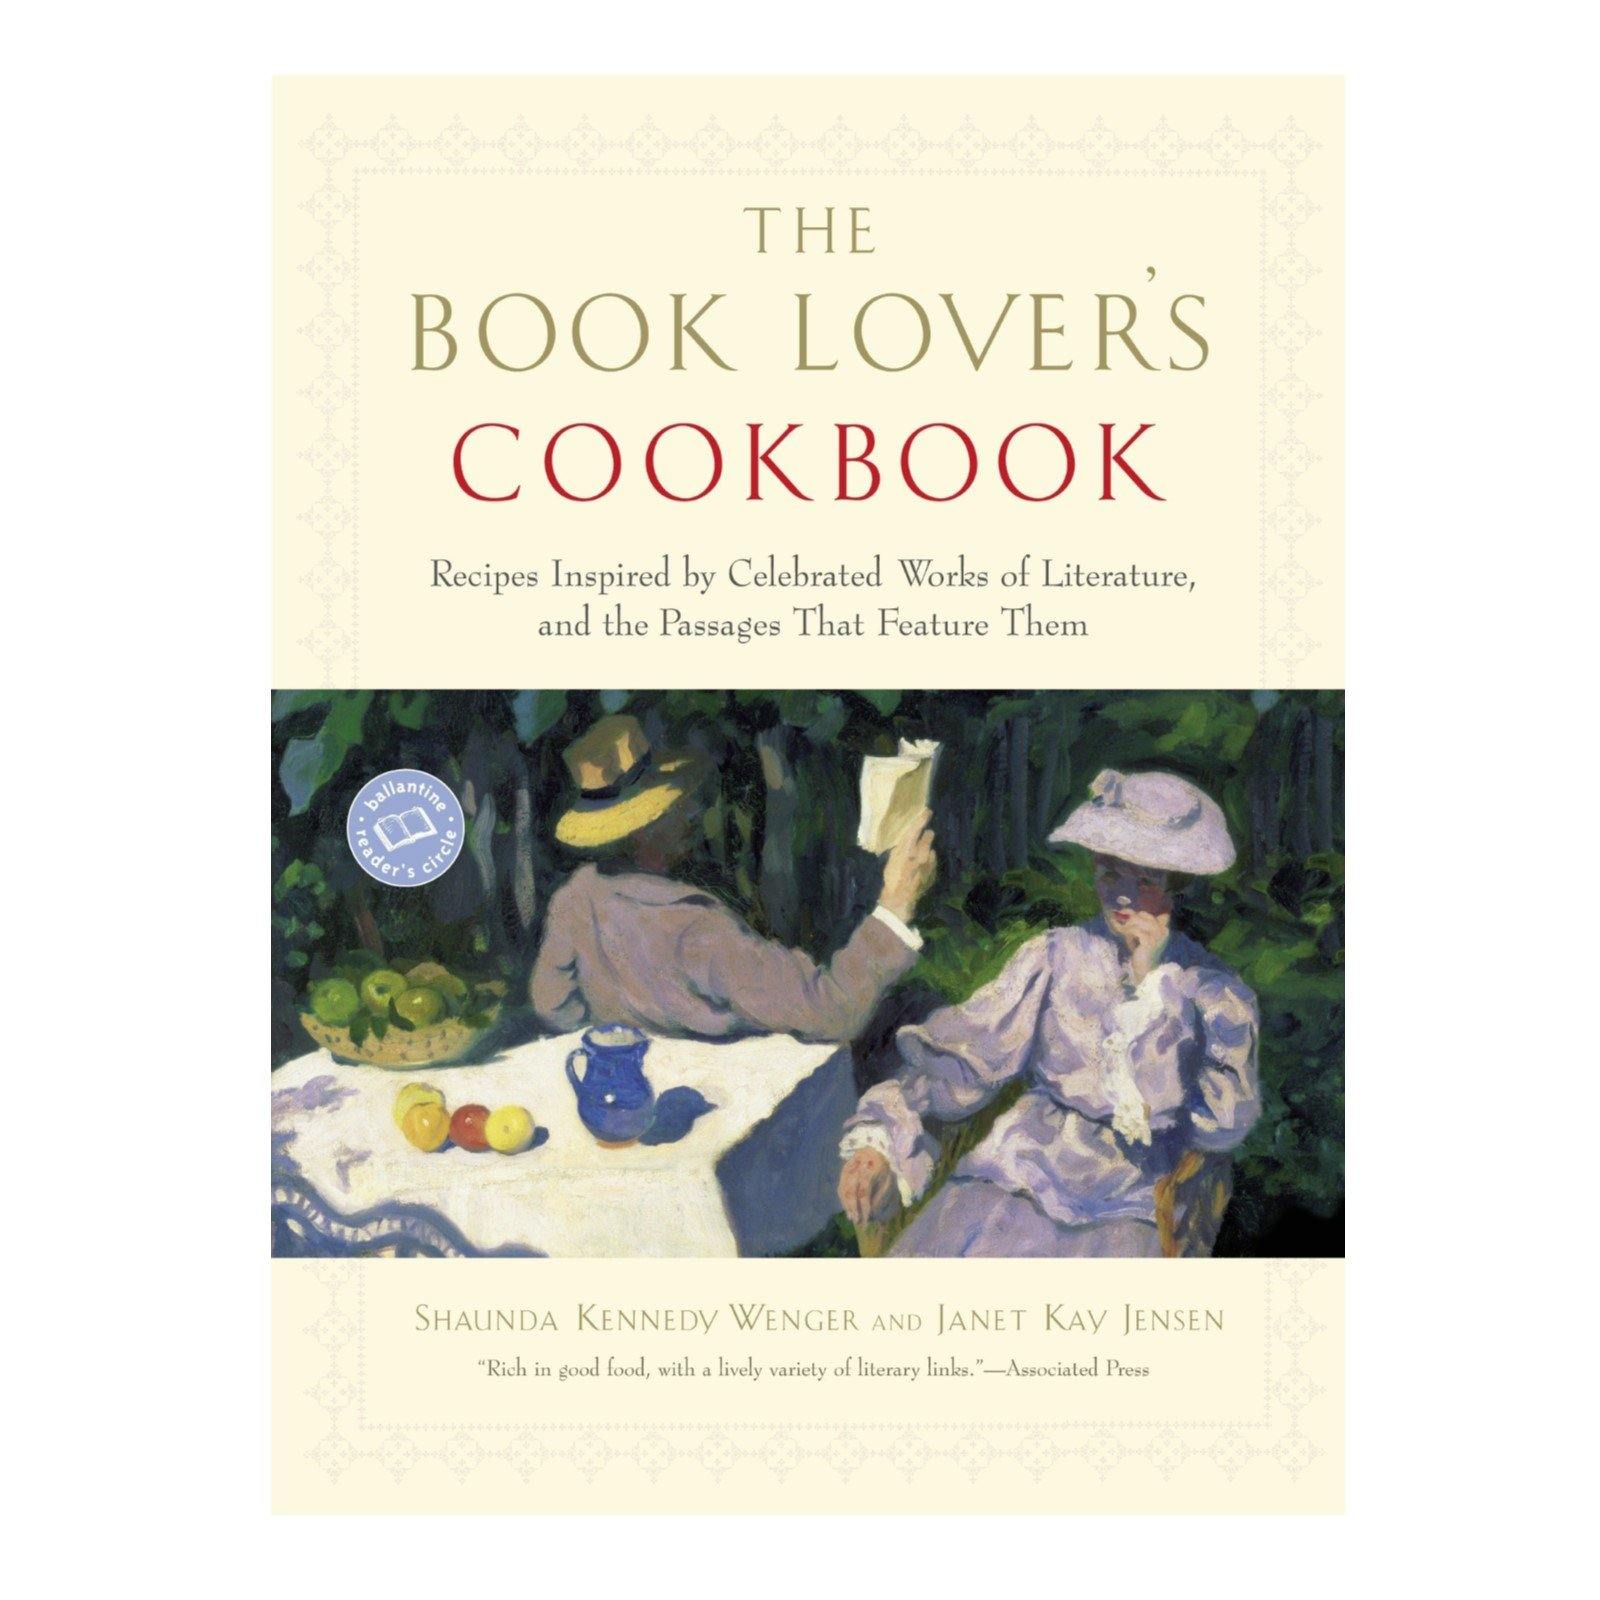 The Book Lover's Cookbook - Library of Congress Shop